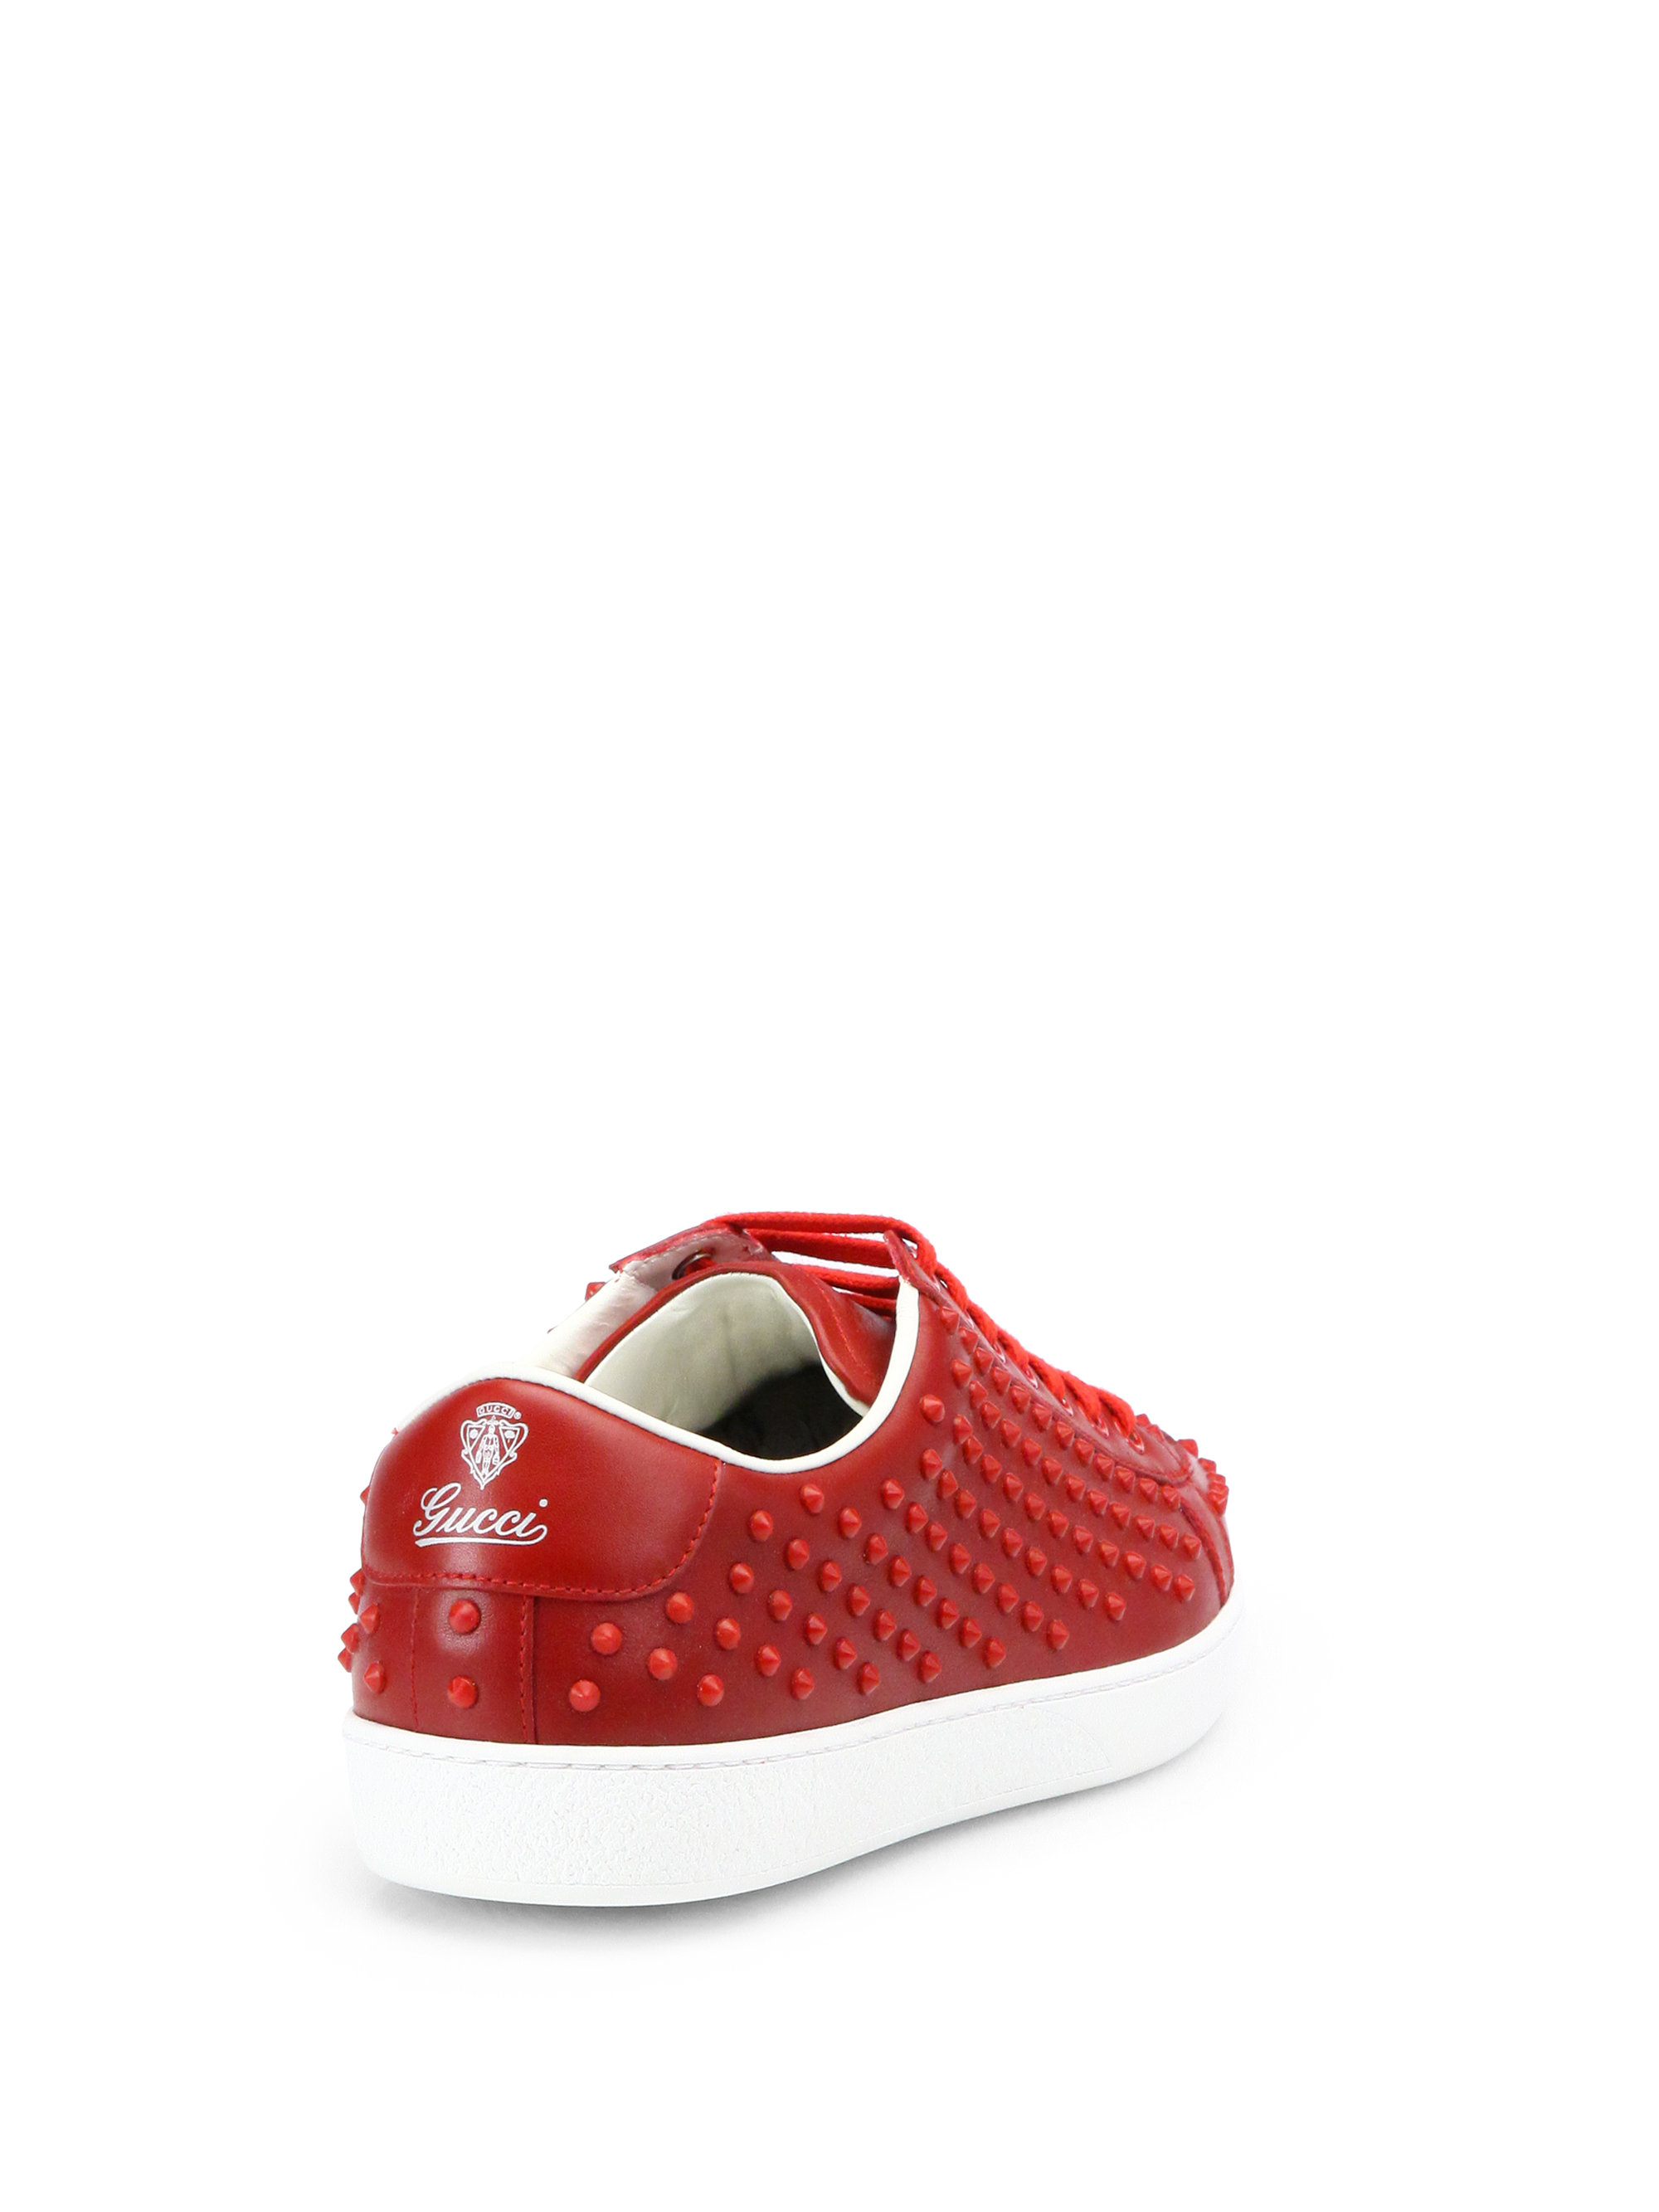 Gucci Brooklyn Studded Laceup Sneakers in Red Lyst